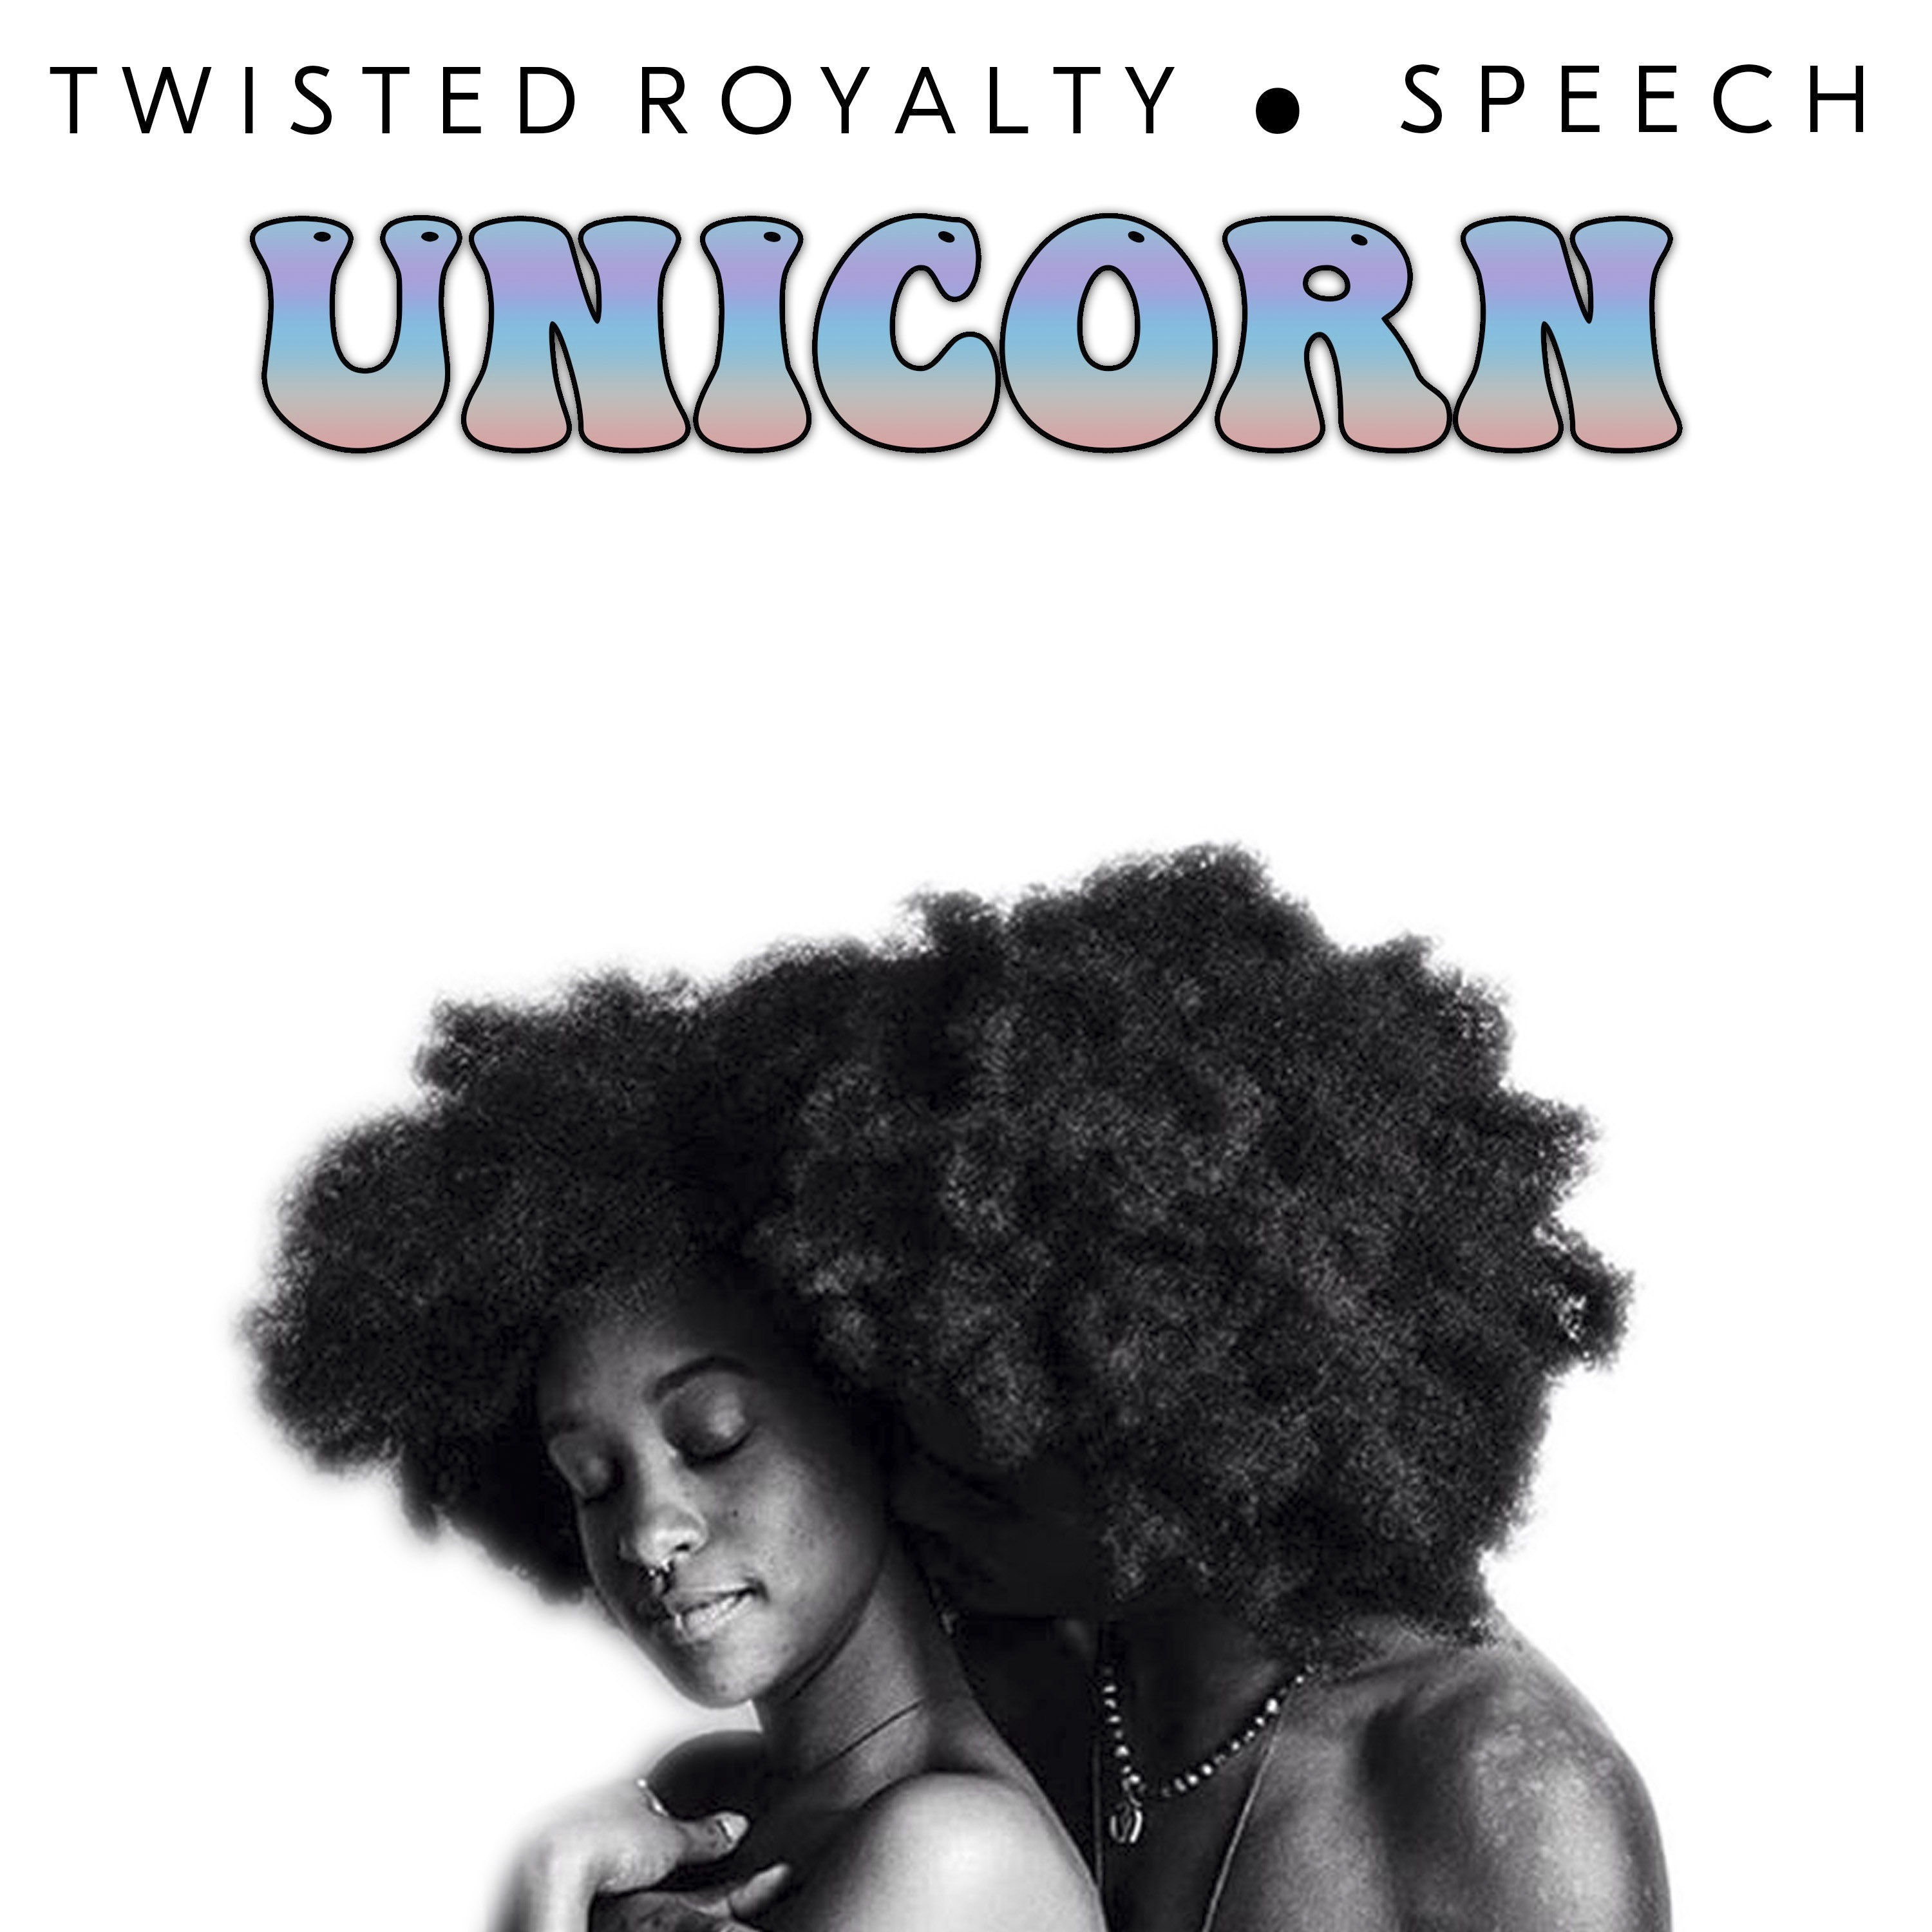 Singer/Songwriter Duo Twisted Royalty Take Destiny by the Horn with Groovy New Song, “Unicorn”